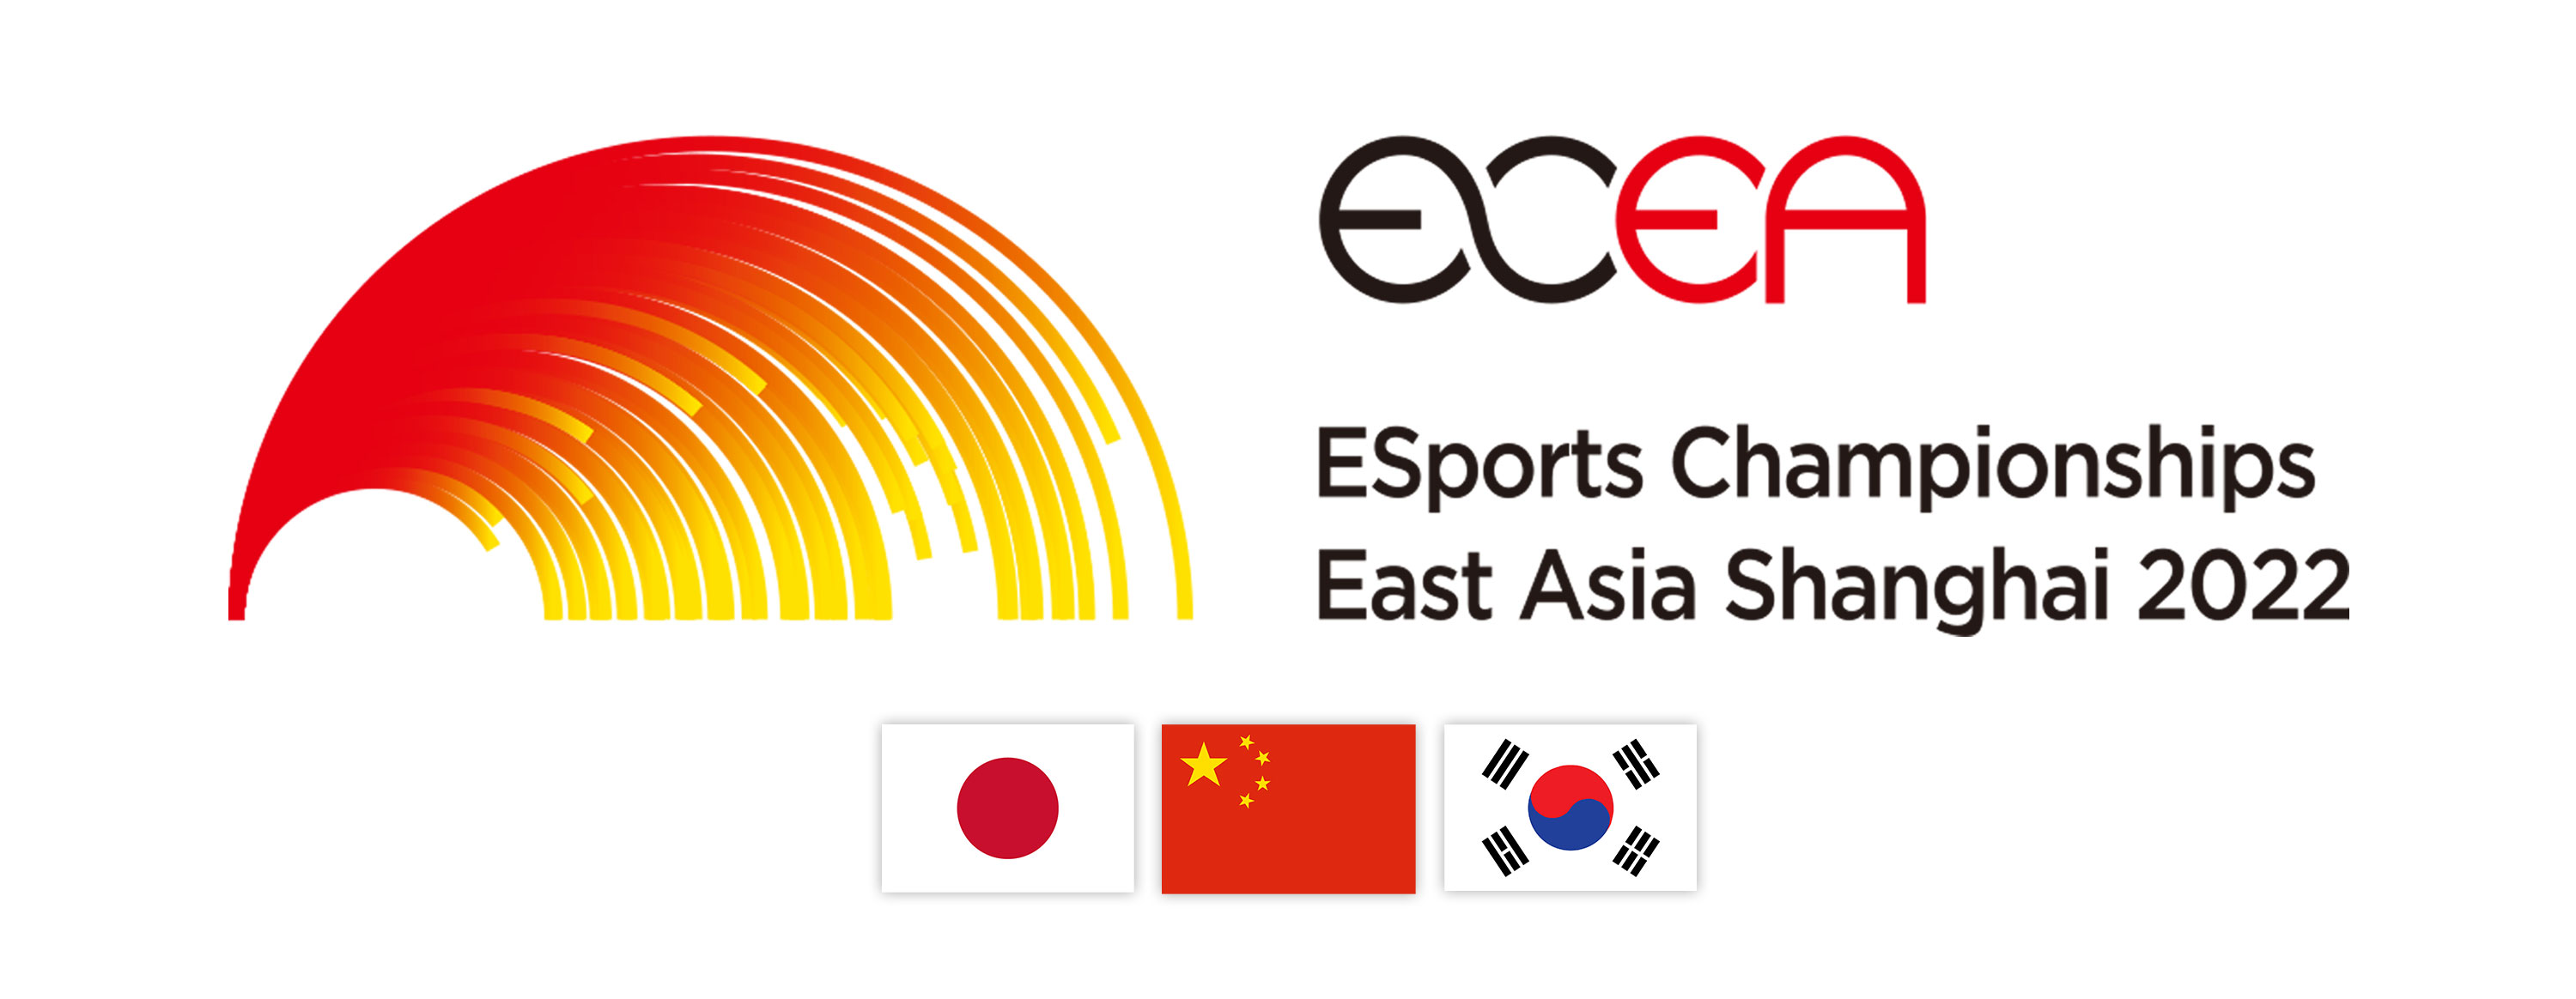 Esports Championships East Asia